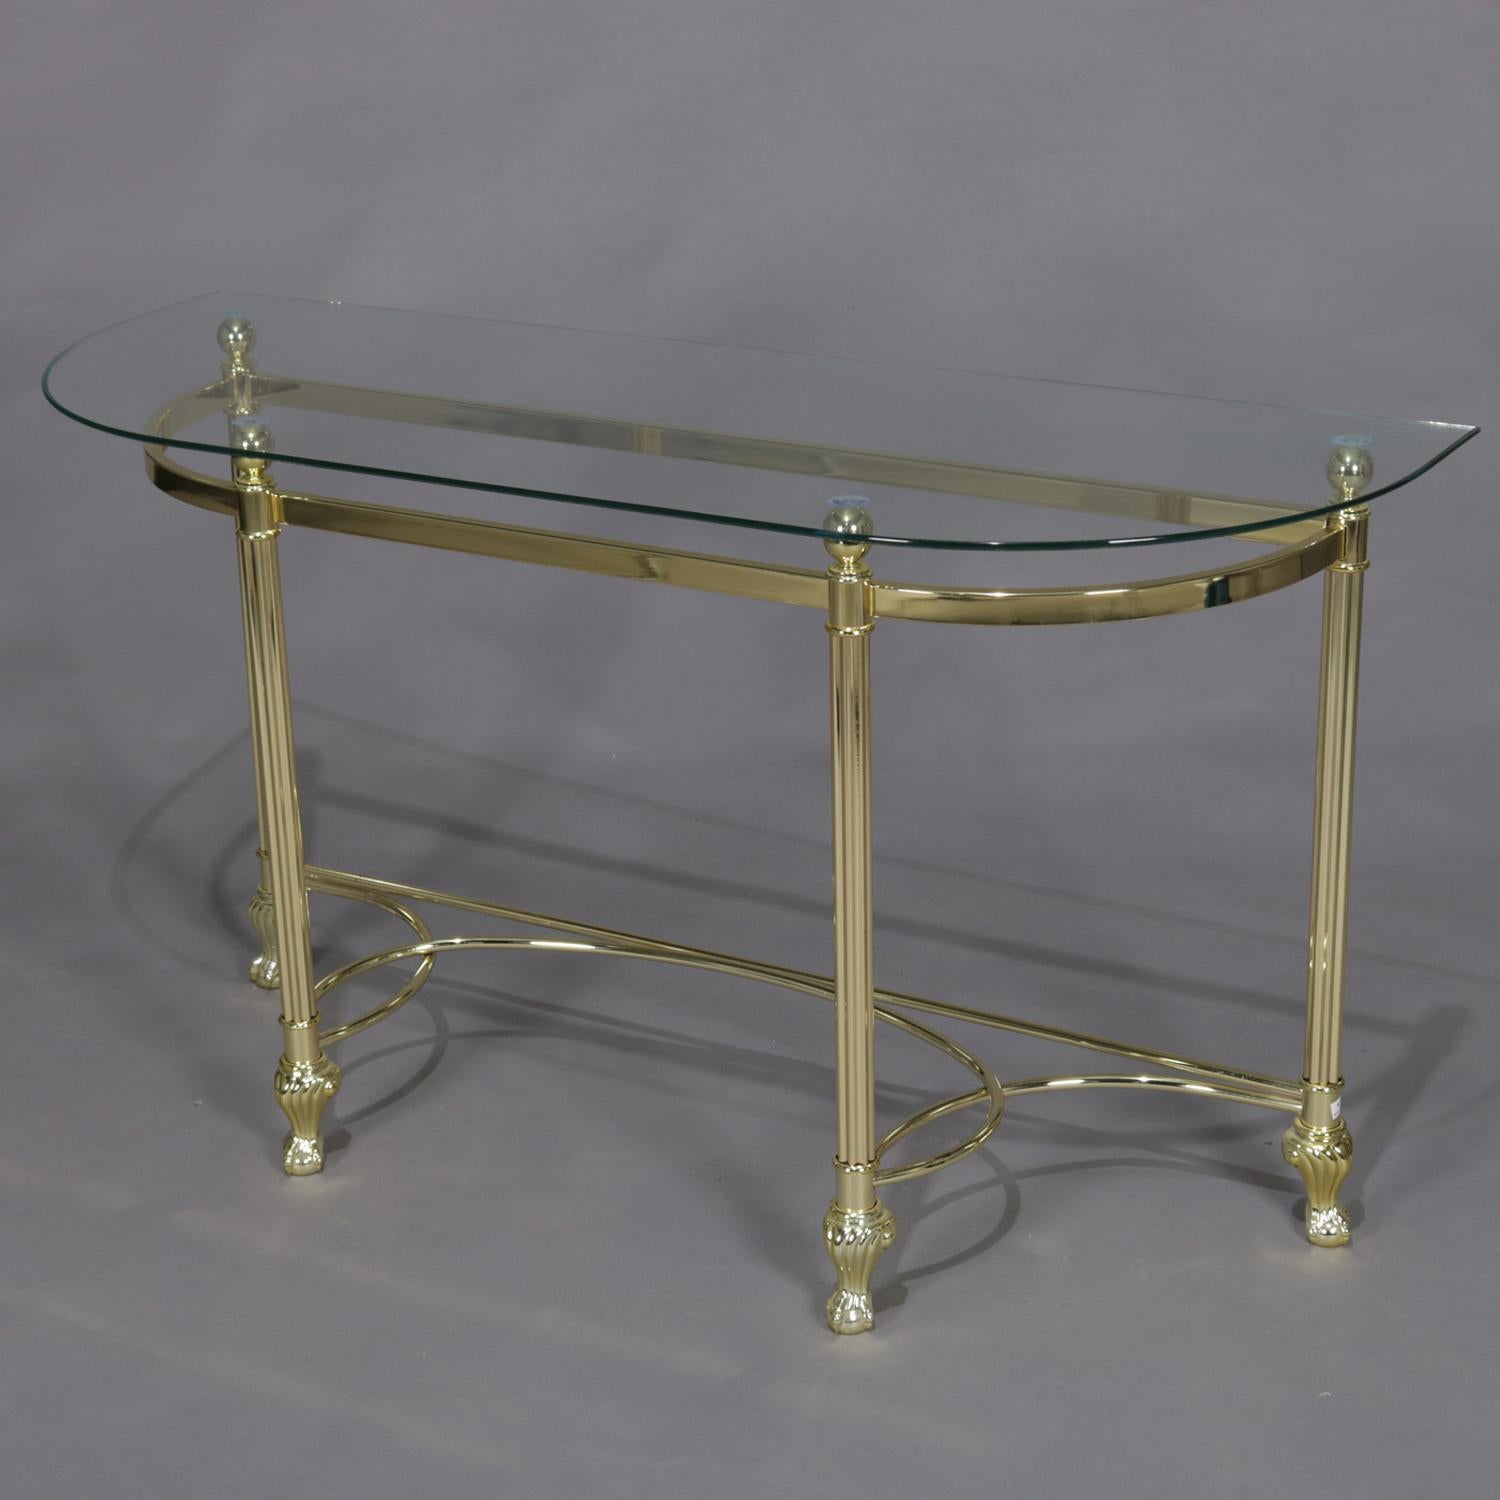 Hollywood Regency Italian Midcentury Transitional Paw Foot Brass and Glass Console Table